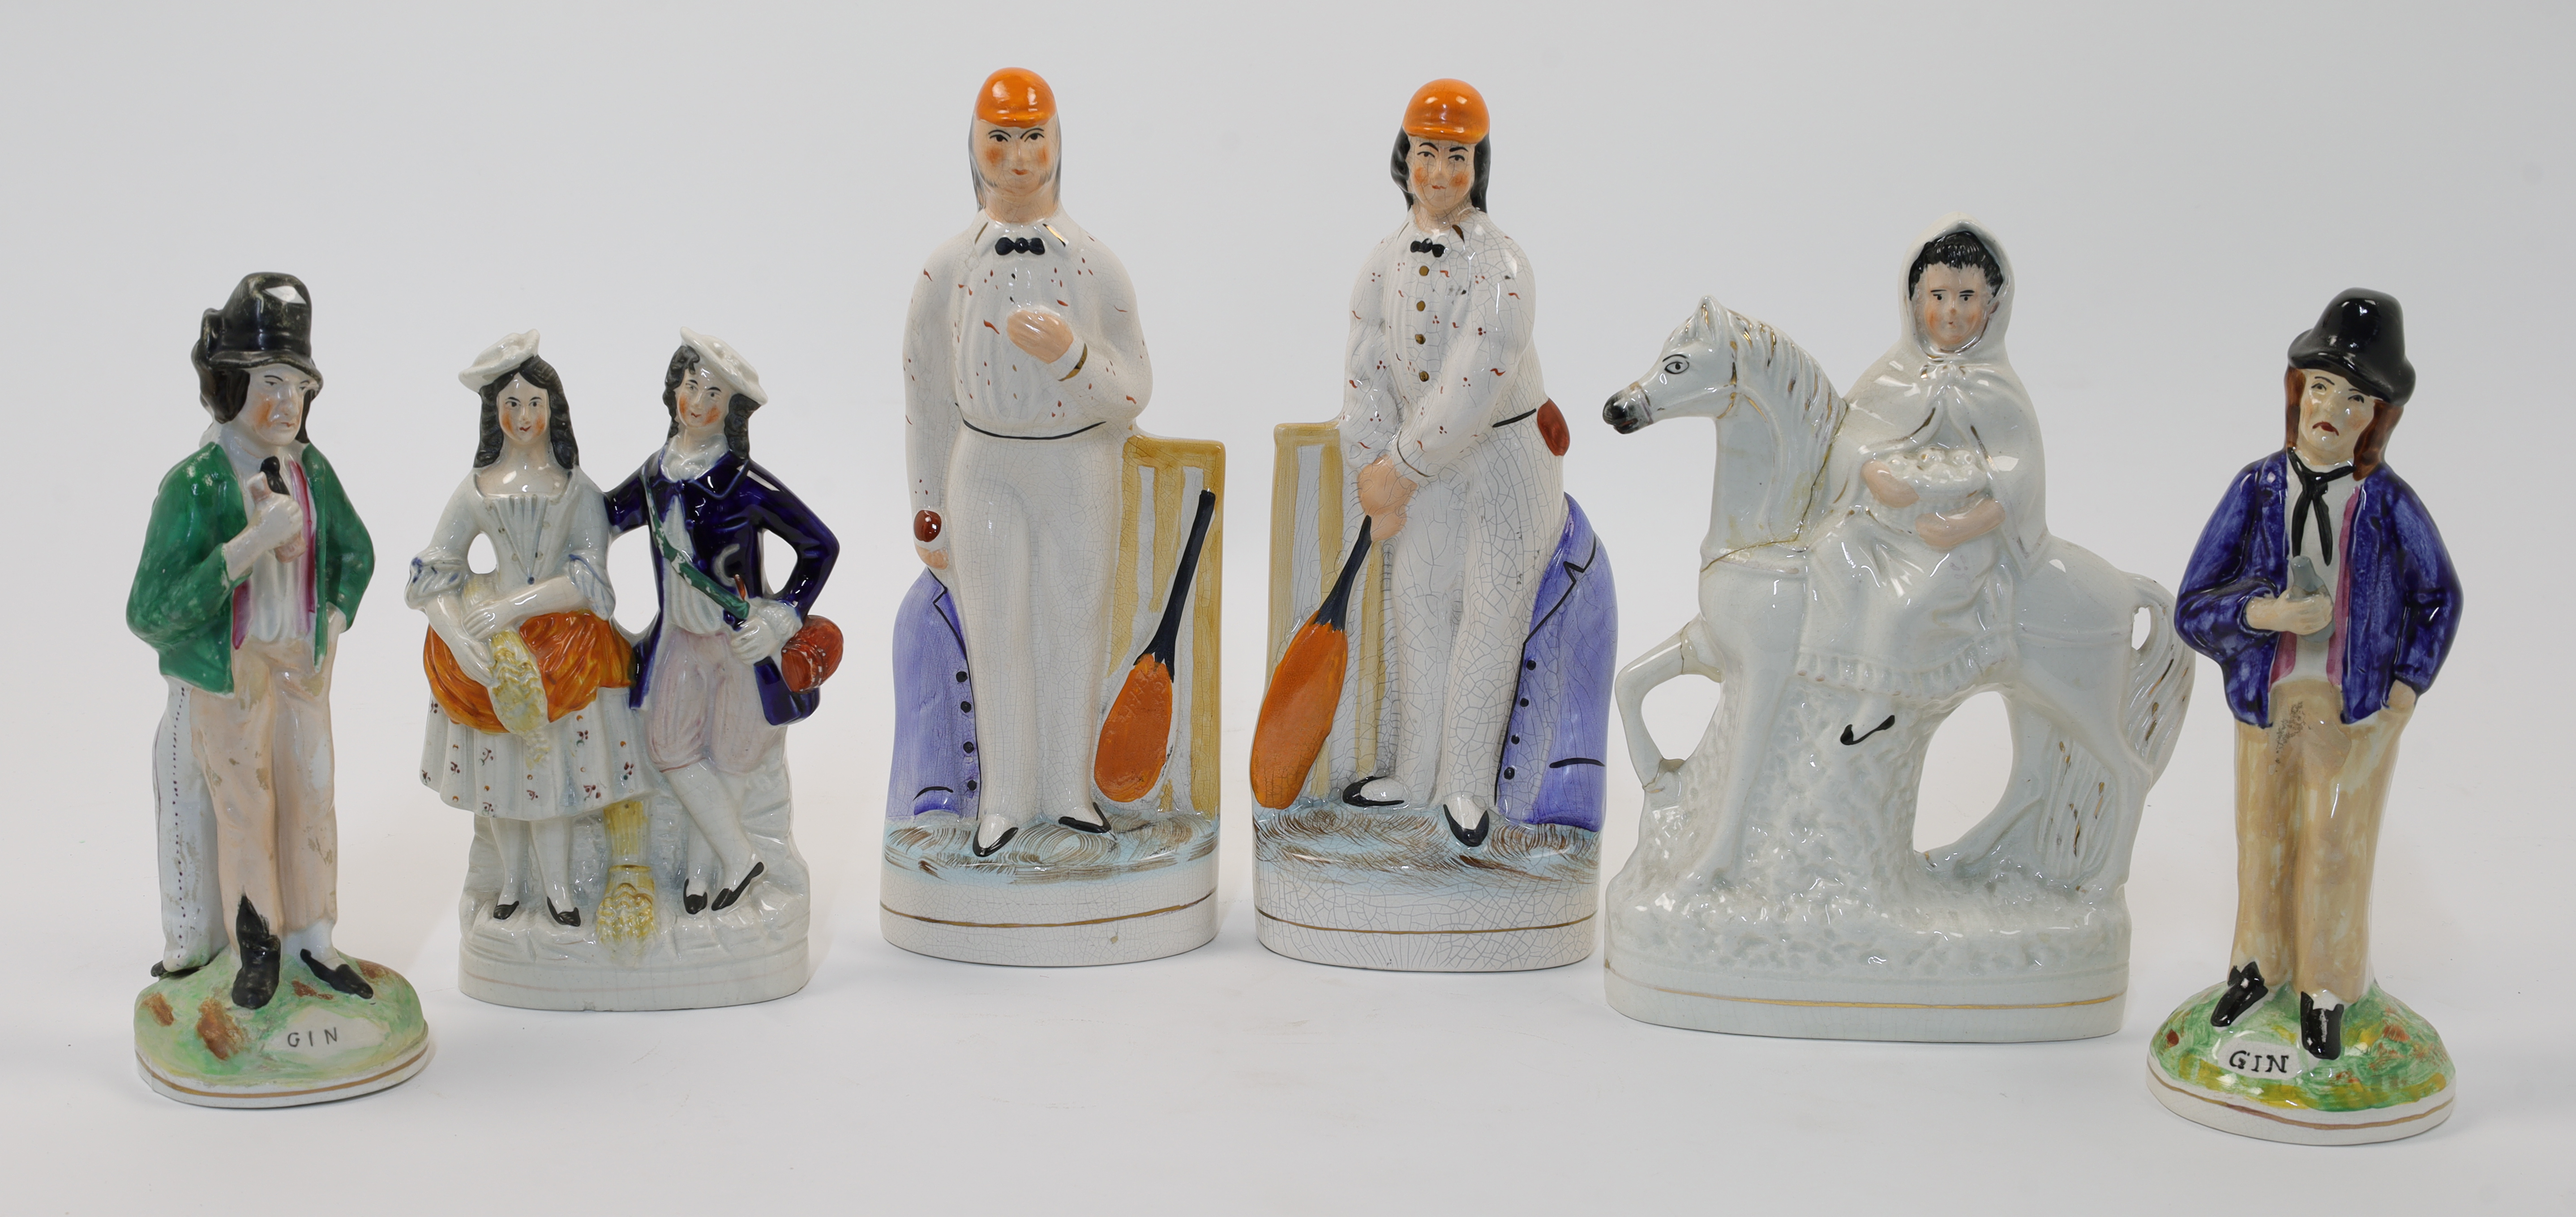 A group of Staffordshire ceramic figures, 19th century, comprising: two double-faced "Gin" and "W... - Image 2 of 2